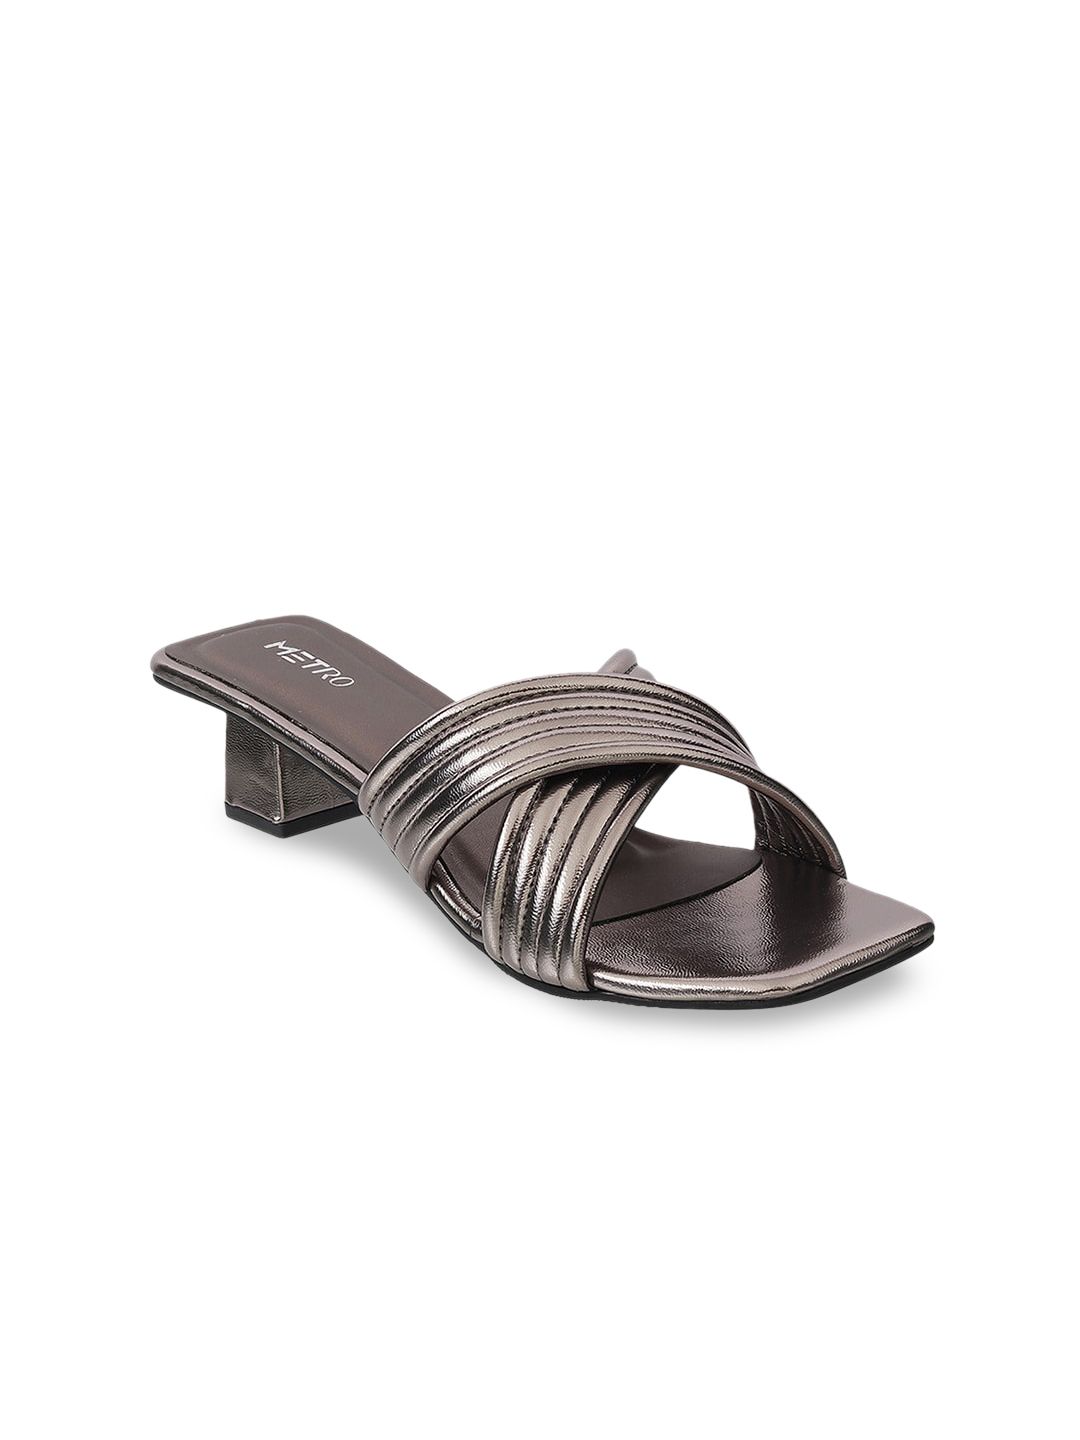 Metro Grey & Silver-Toned Striped Block Sandals Price in India